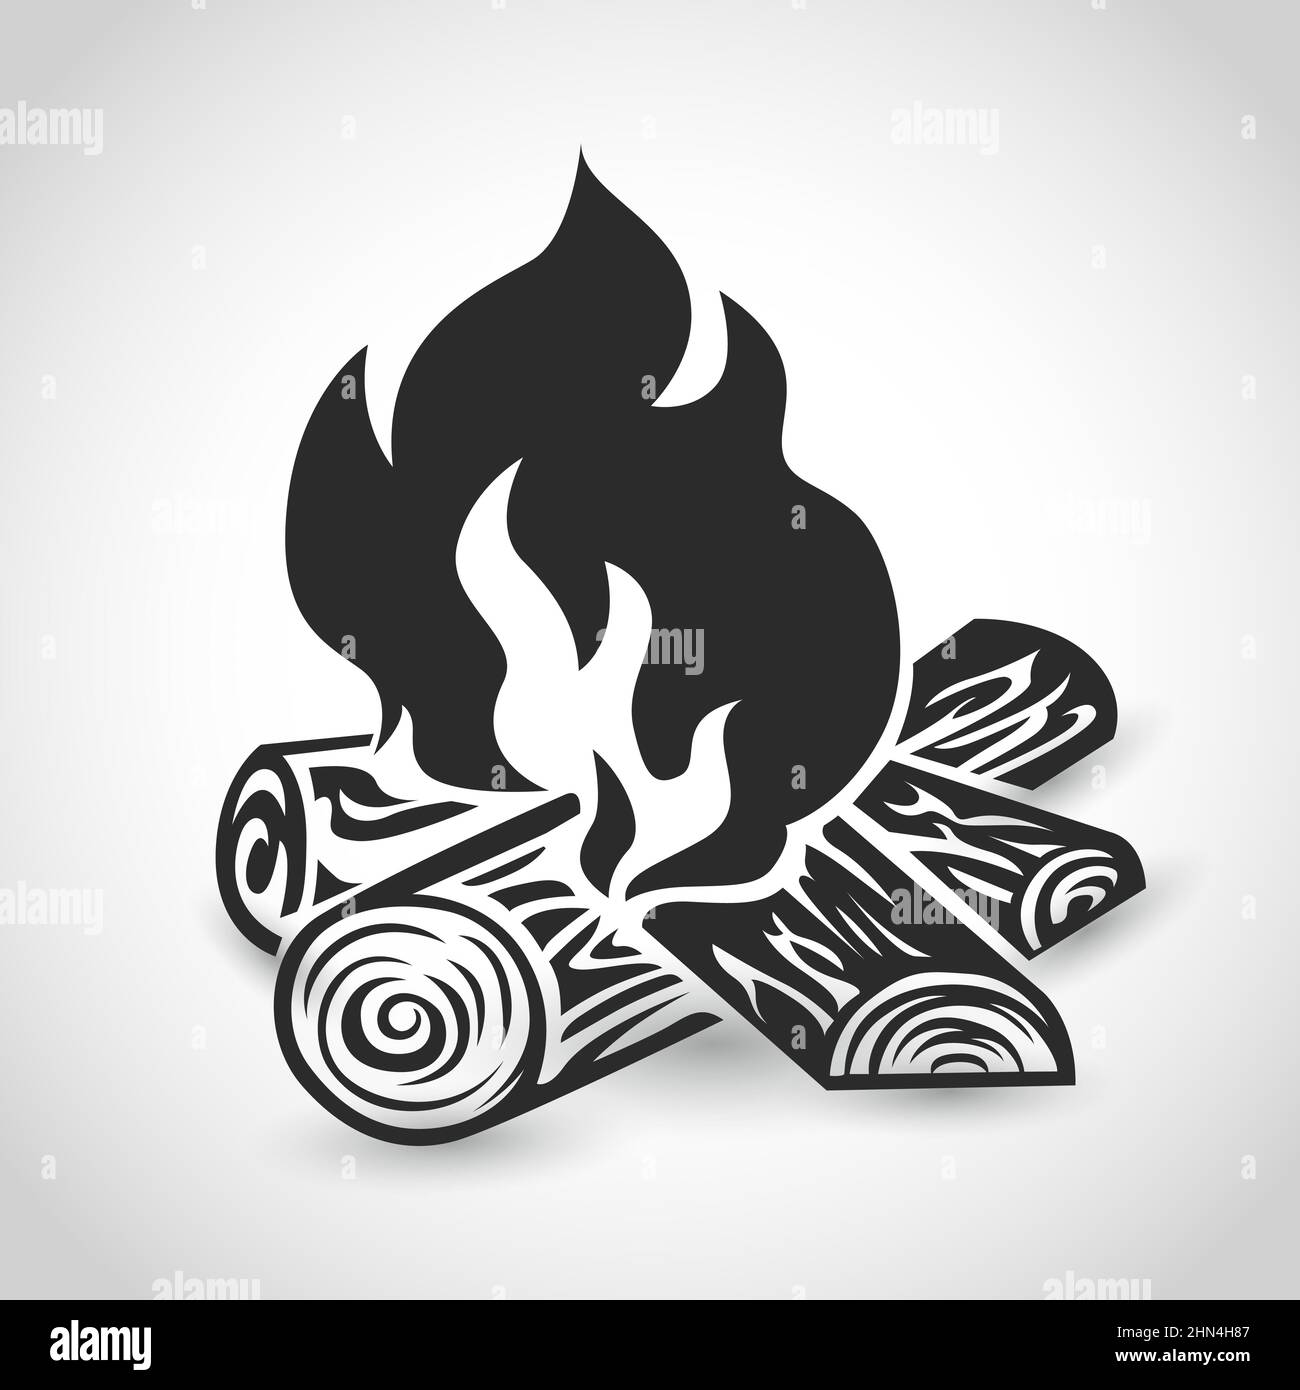 Campfire icon with logs isolated on white background Stock Vector